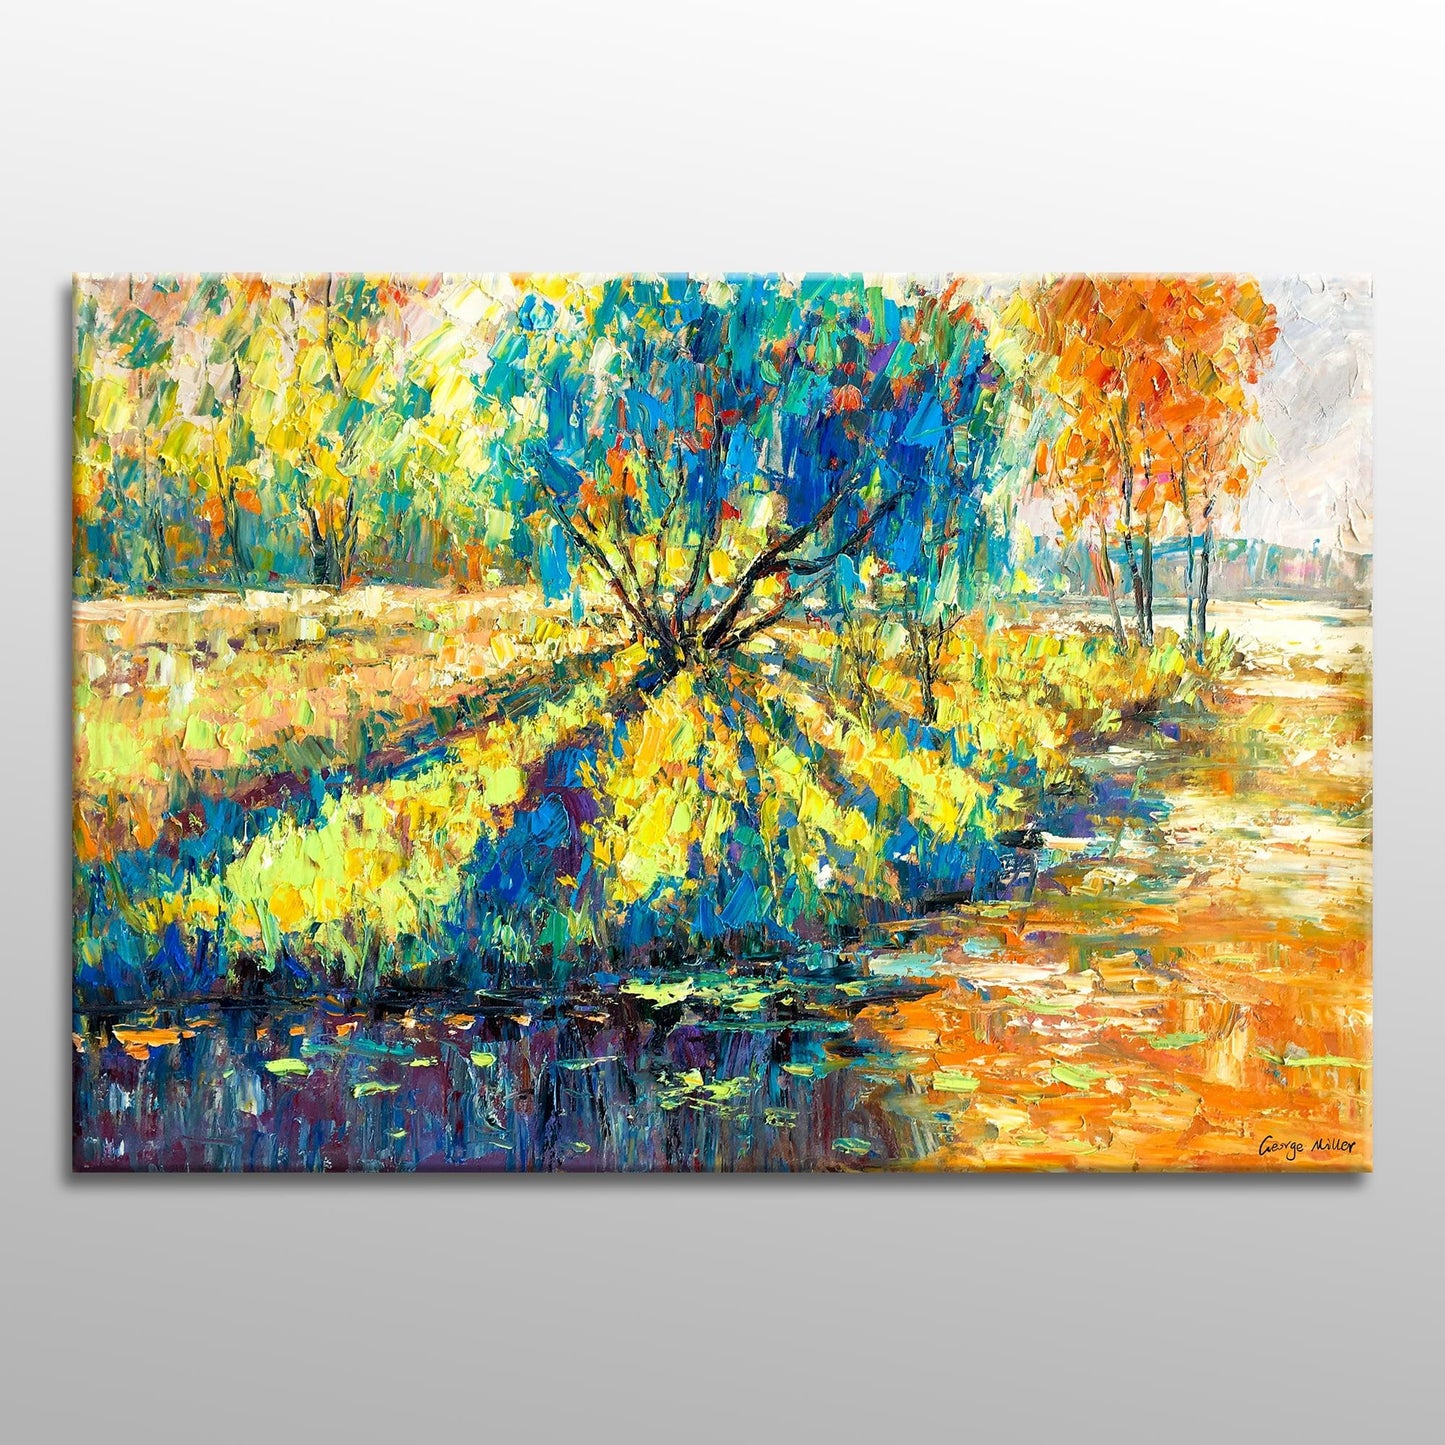 Landscape Oil Painting By The River, Canvas Painting, Paintings On Canvas, Landscape, Oversized Art, Impressionist Art, Impasto Oil Painting